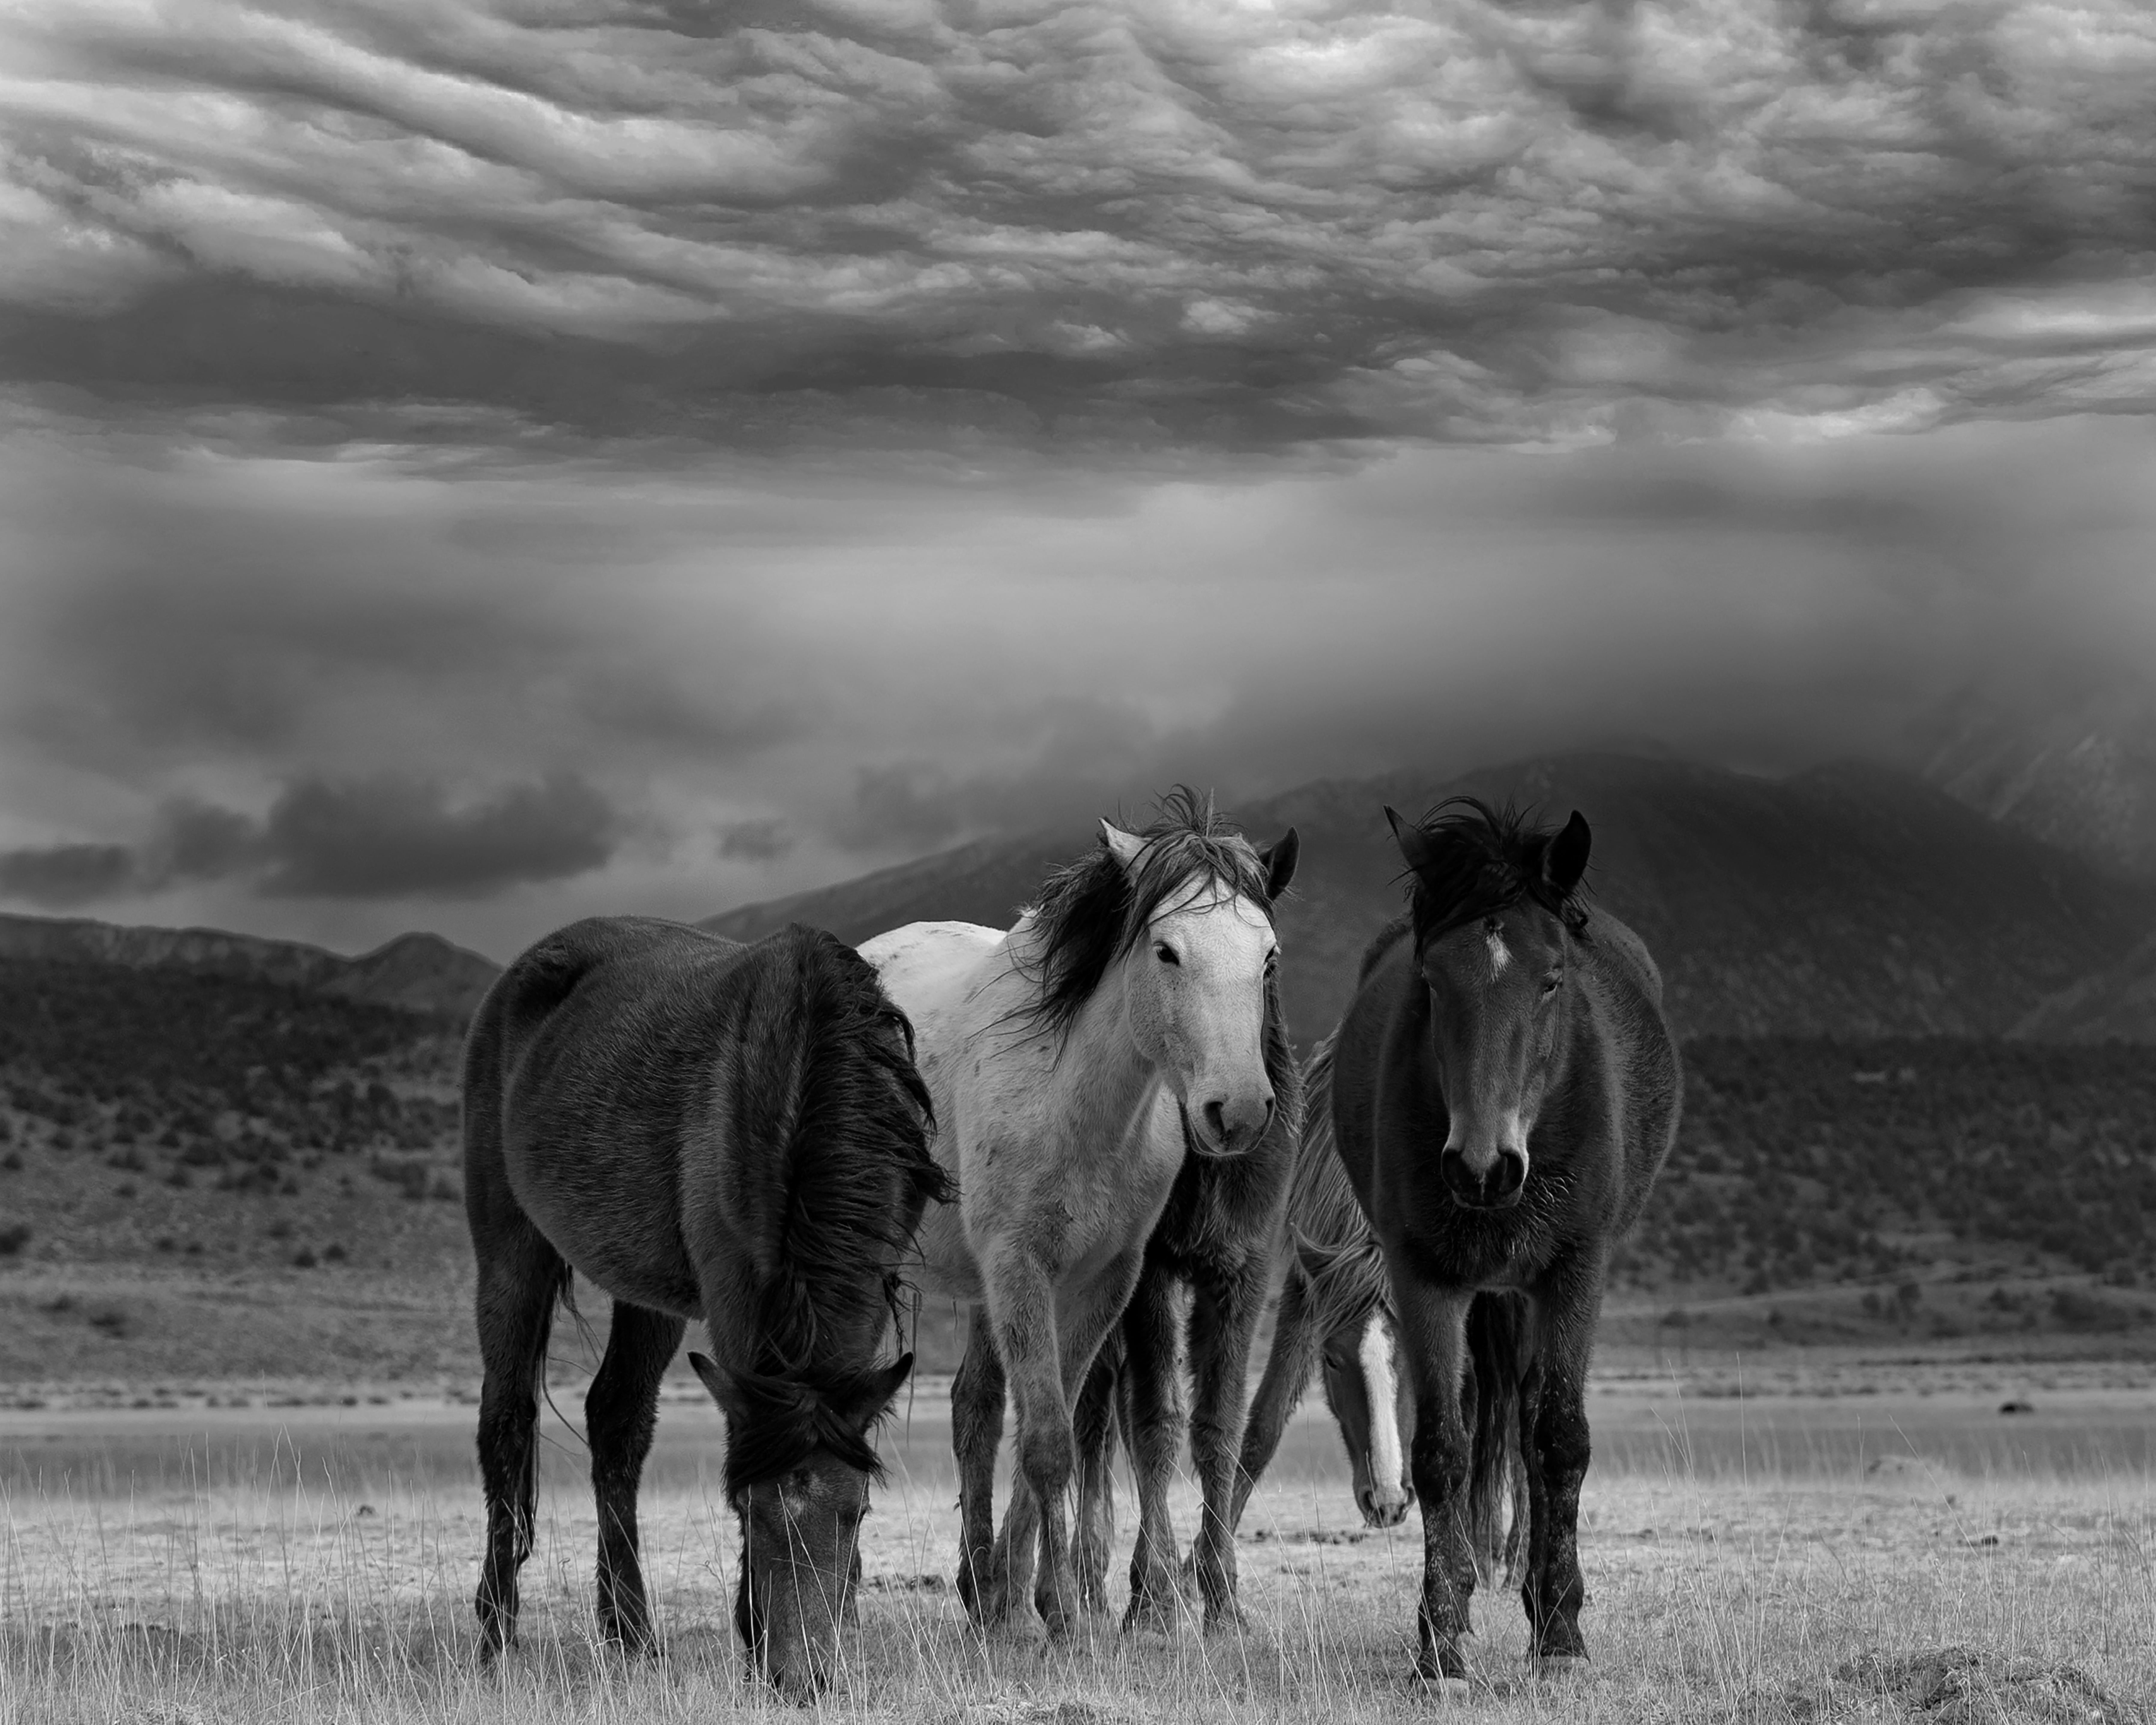 Shane Russeck Animal Print - "Dust and Horses" 30x40 Black and White Photography Wild Horses Mustangs Singed